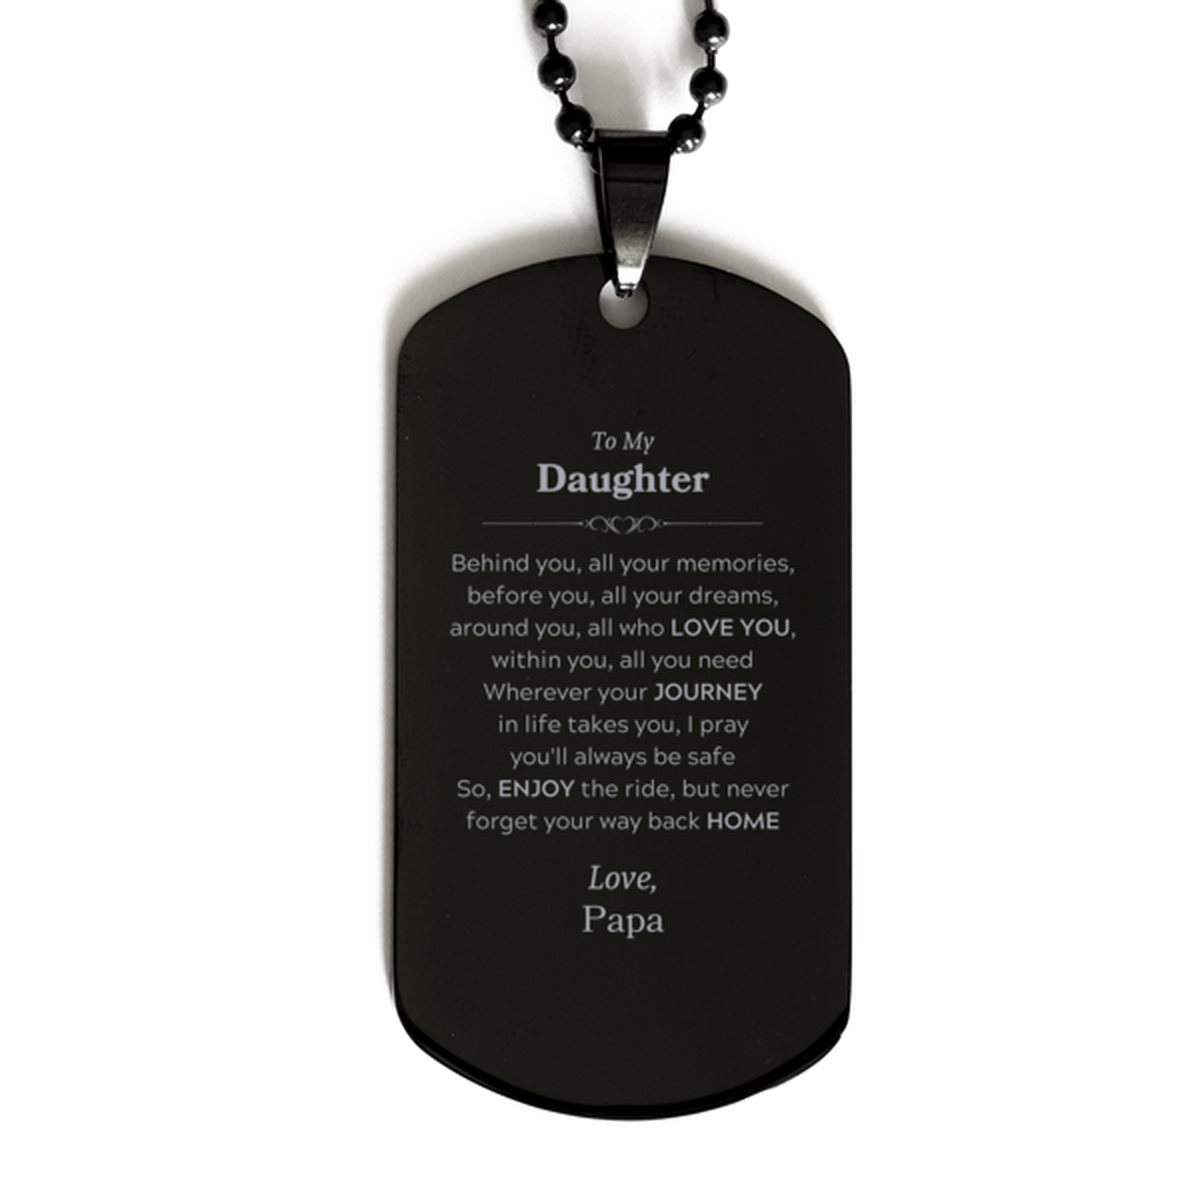 To My Daughter Graduation Gifts from Papa, Daughter Black Dog Tag Christmas Birthday Gifts for Daughter Behind you, all your memories, before you, all your dreams. Love, Papa